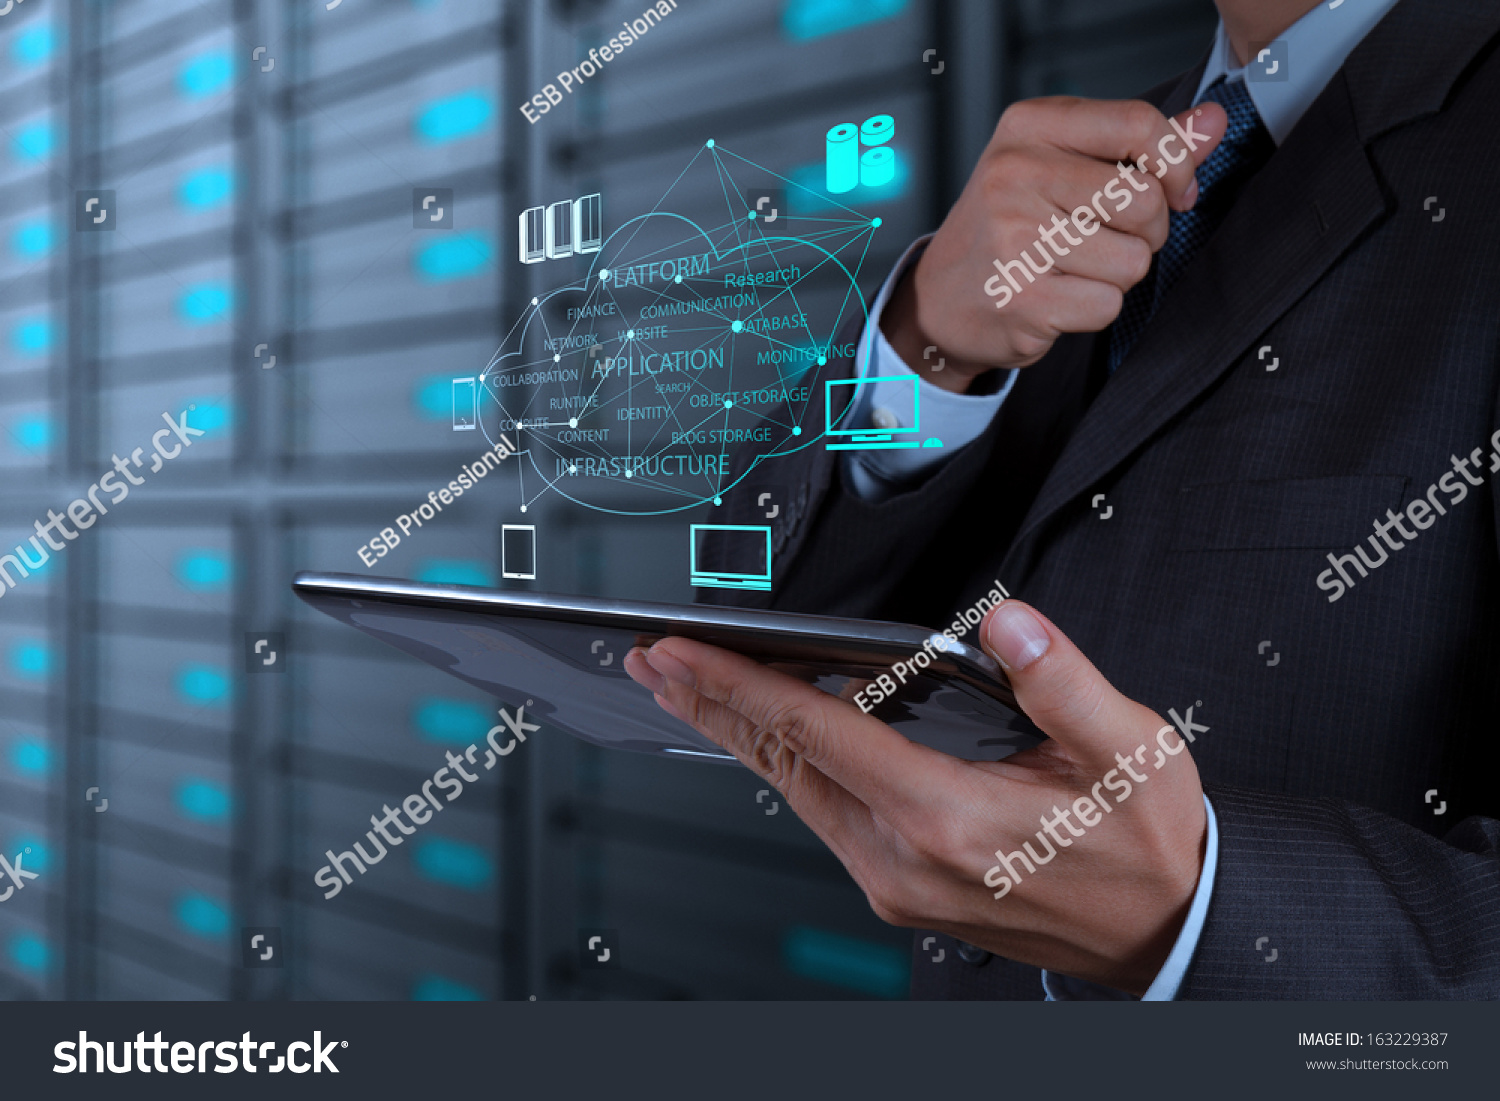 Businessman hand working with a Cloud Computing diagram on the new computer interface as concept #163229387